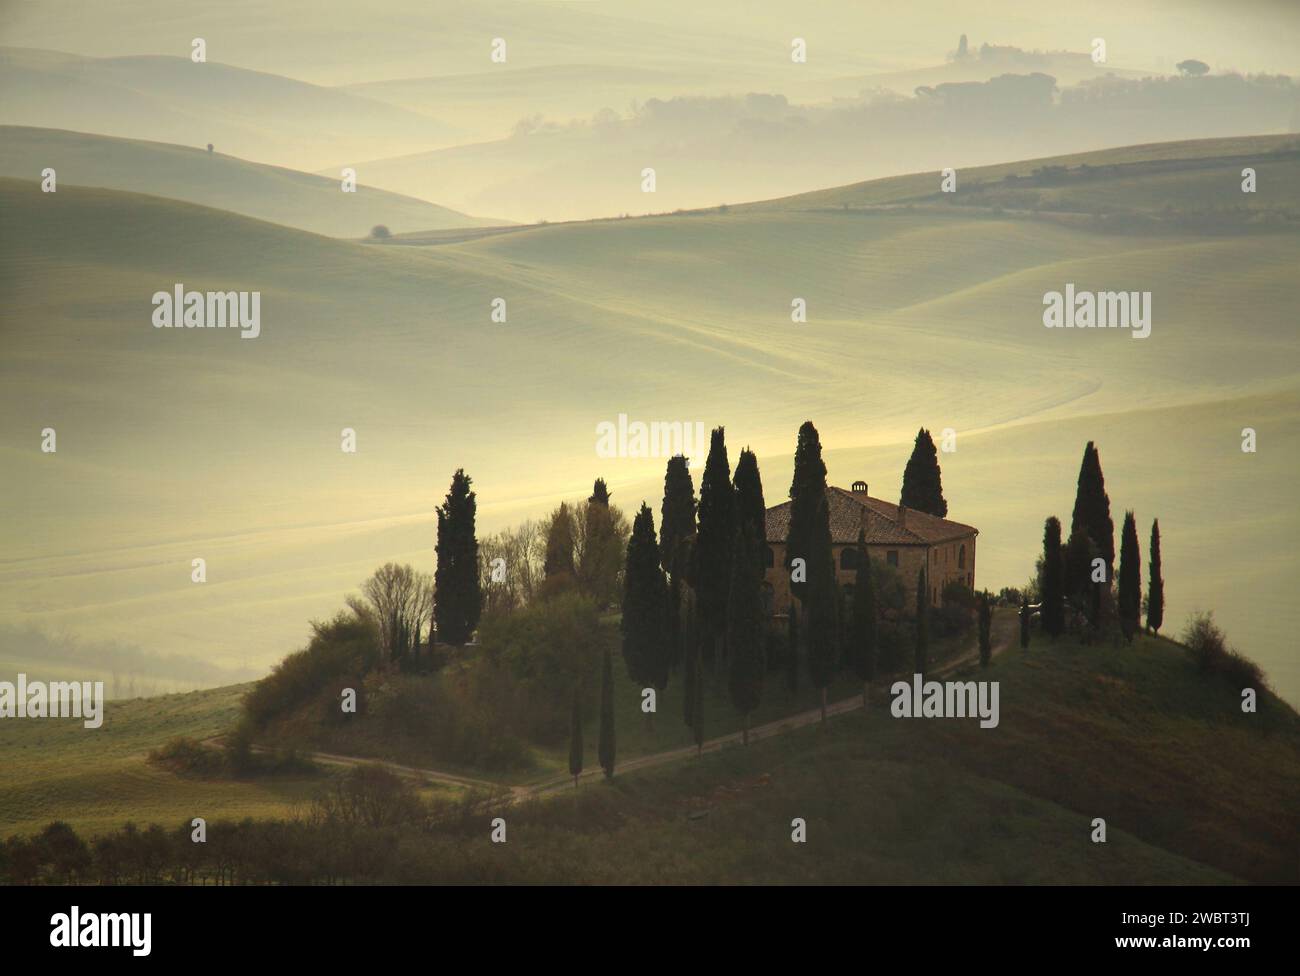 A farmhouse on top of a hill in a typical landscape in Tuscany, Italy. Stock Photo